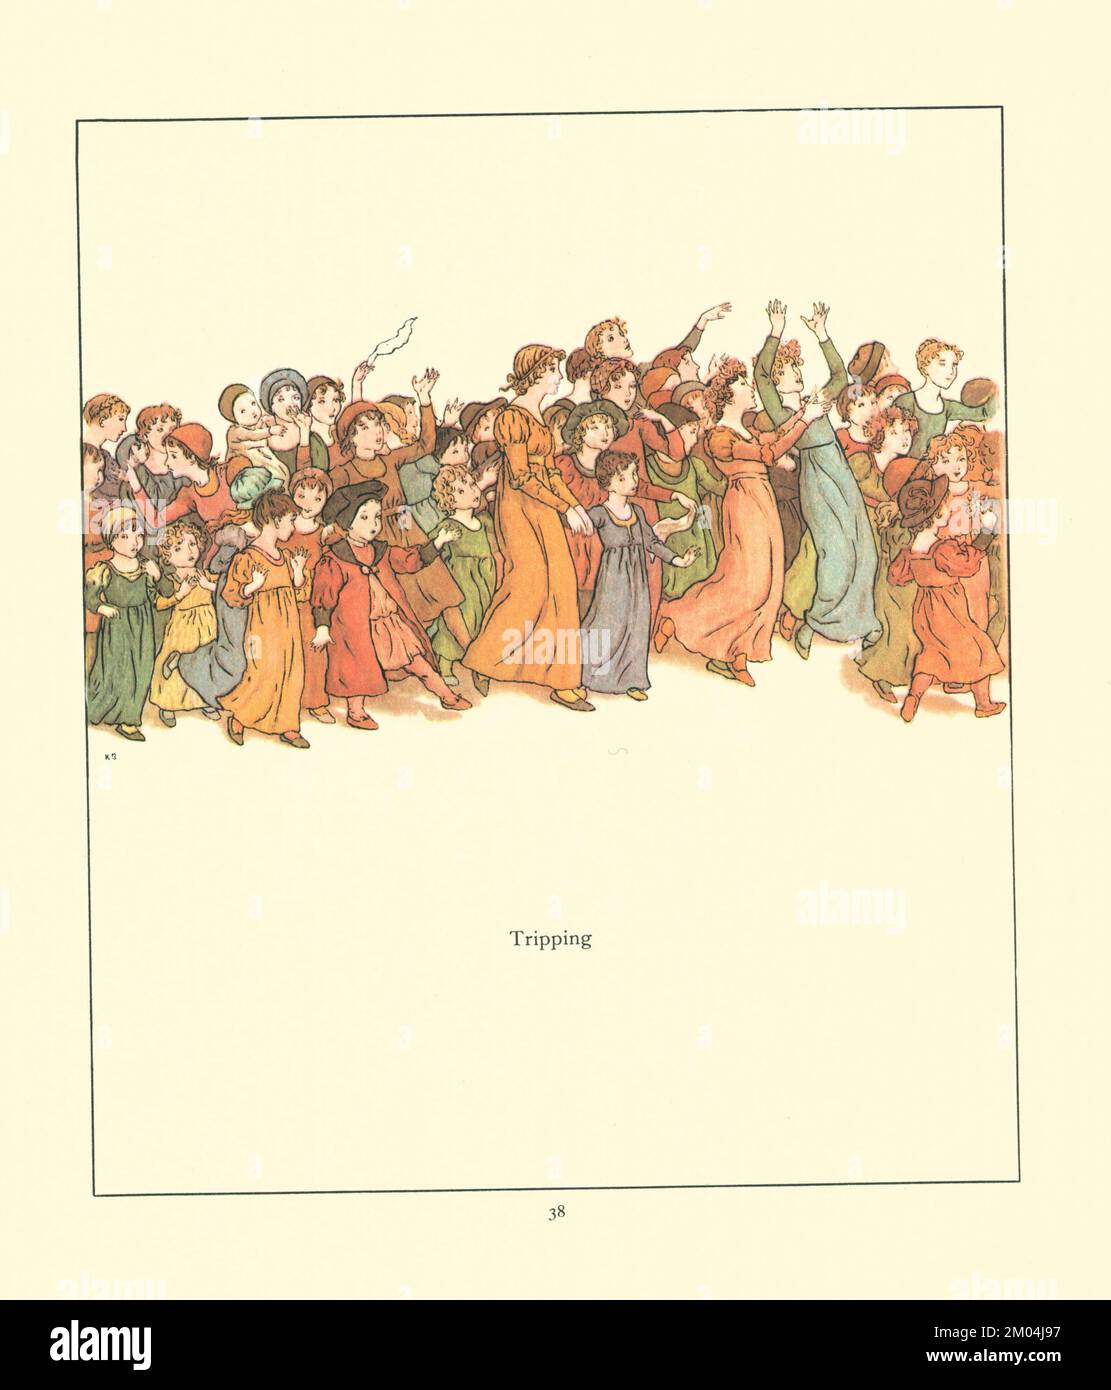 Tripping and Skipping, ran merrily after The wonderful music with shouting and laughter Illustrated by KATE GREENAWAY (1846-1901) English artist and writer. for The Pied Piper of Hamelin by Robert Browning, 1812-1889 Published by Warne in 1910 Stock Photo